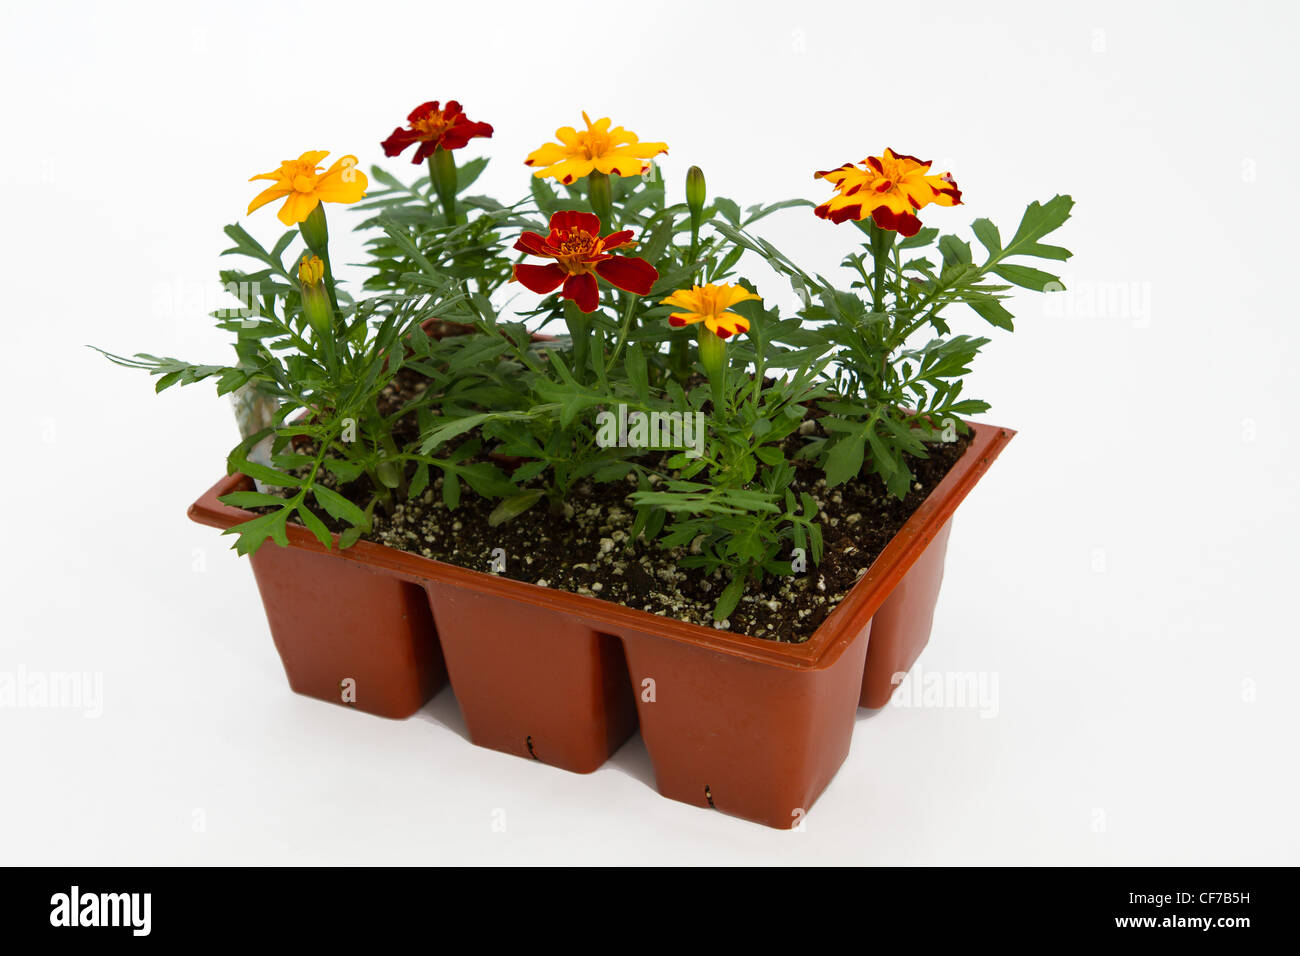 A commercial nursery's  jumbo or 6 pack of marigolds isolated on a white background. Stock Photo